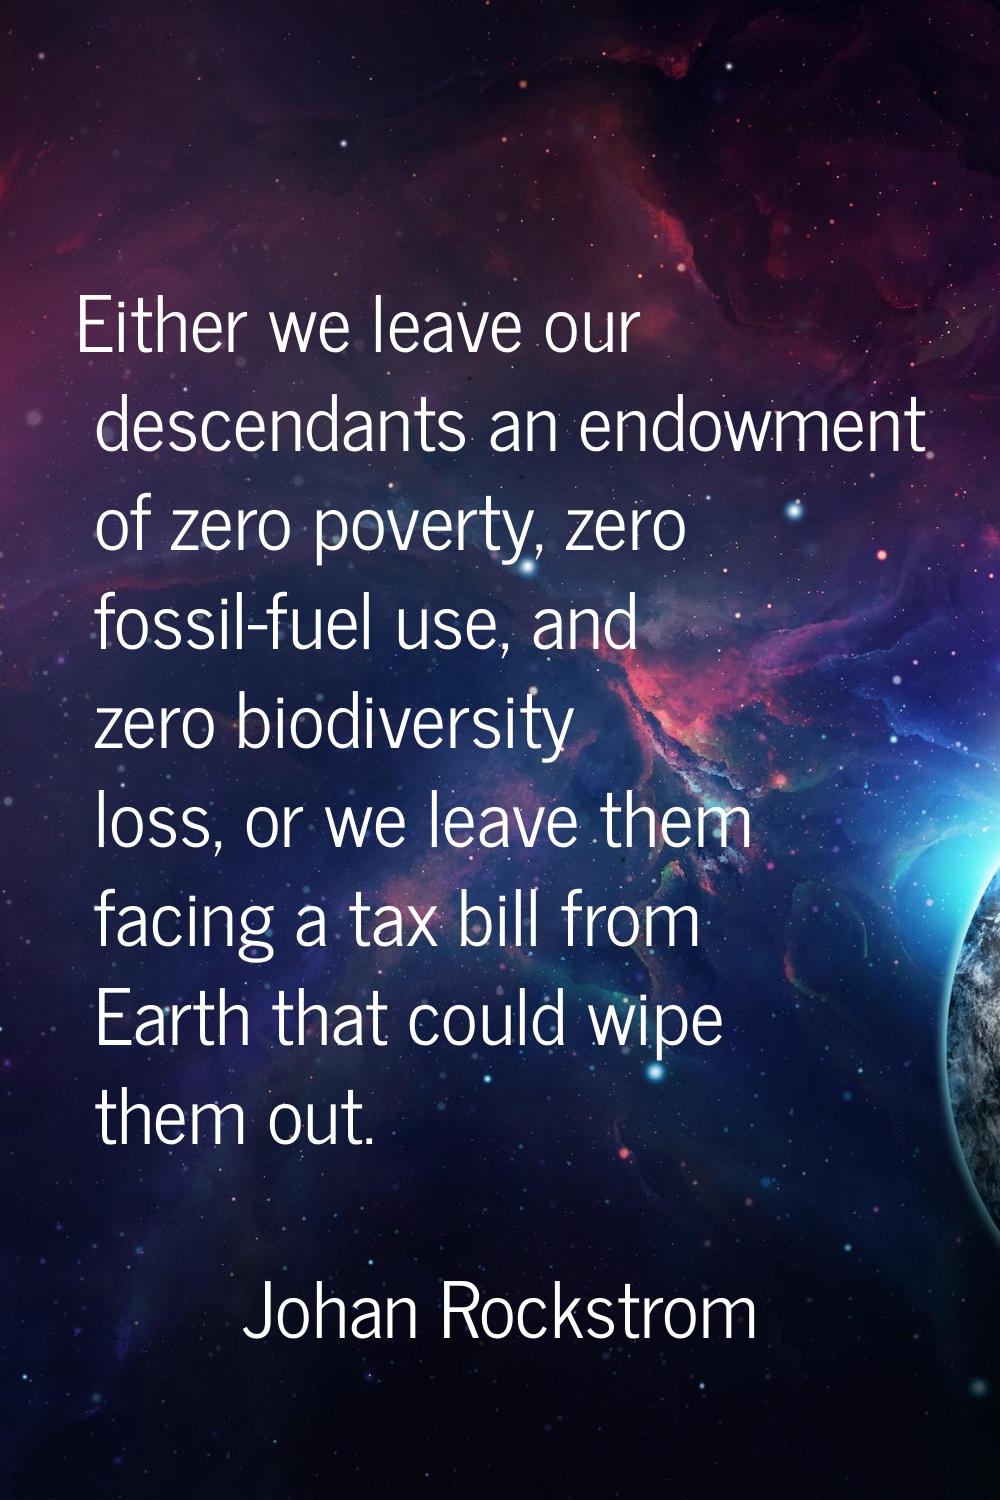 Either we leave our descendants an endowment of zero poverty, zero fossil-fuel use, and zero biodiv